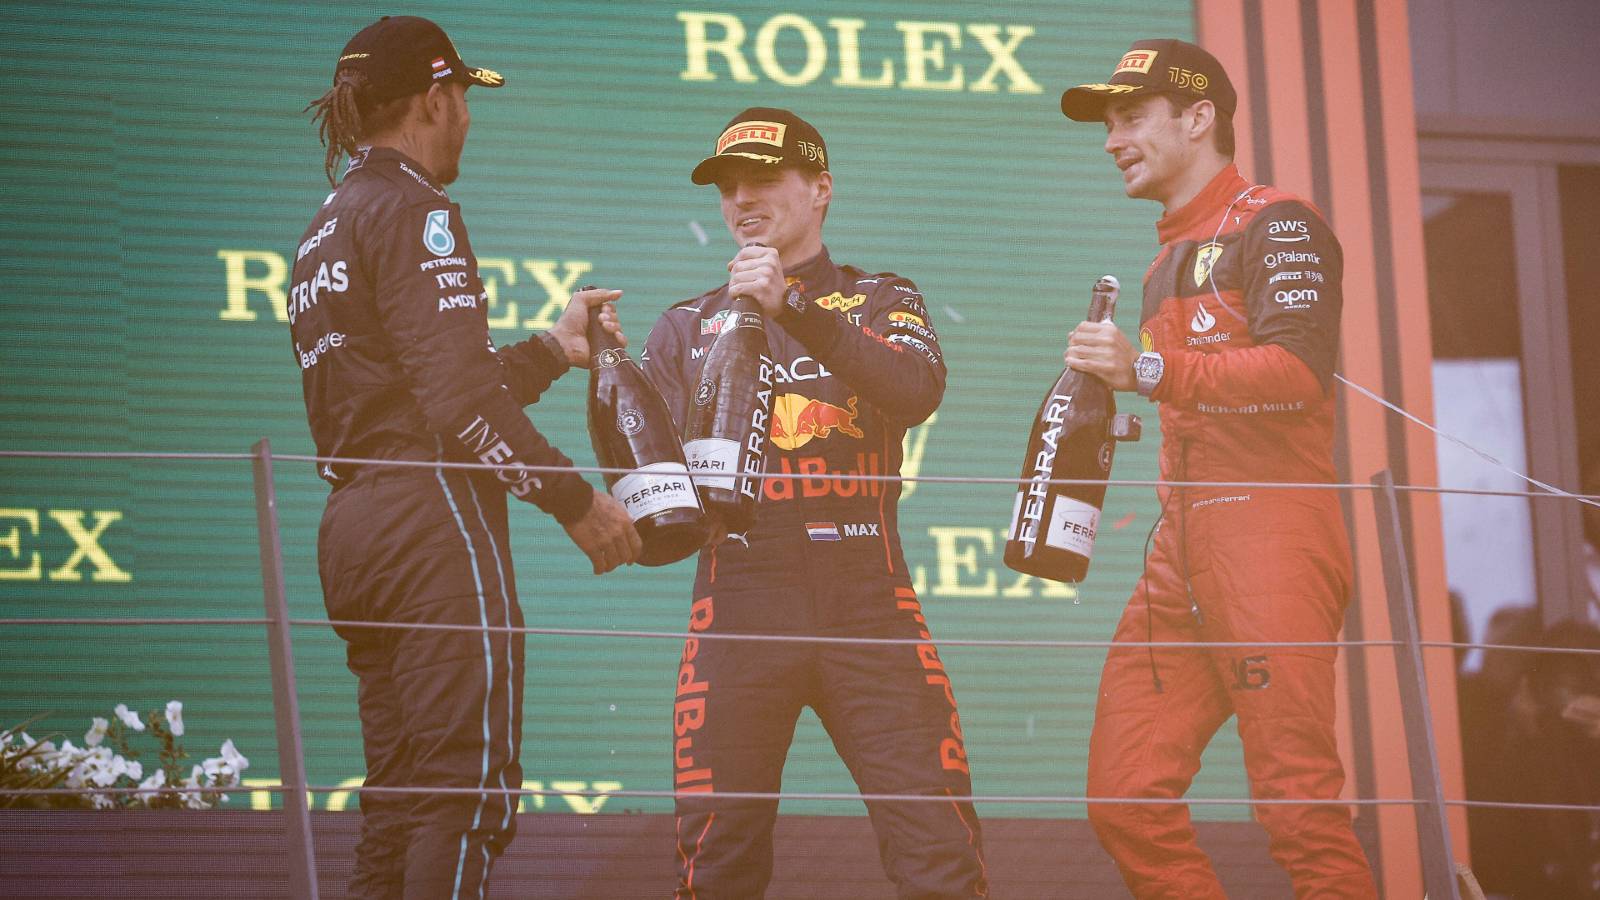 Lewis Hamilton and Max Verstappen on the Austrian GP podium. Red Bull Ring July 2022. F1 driver contracts